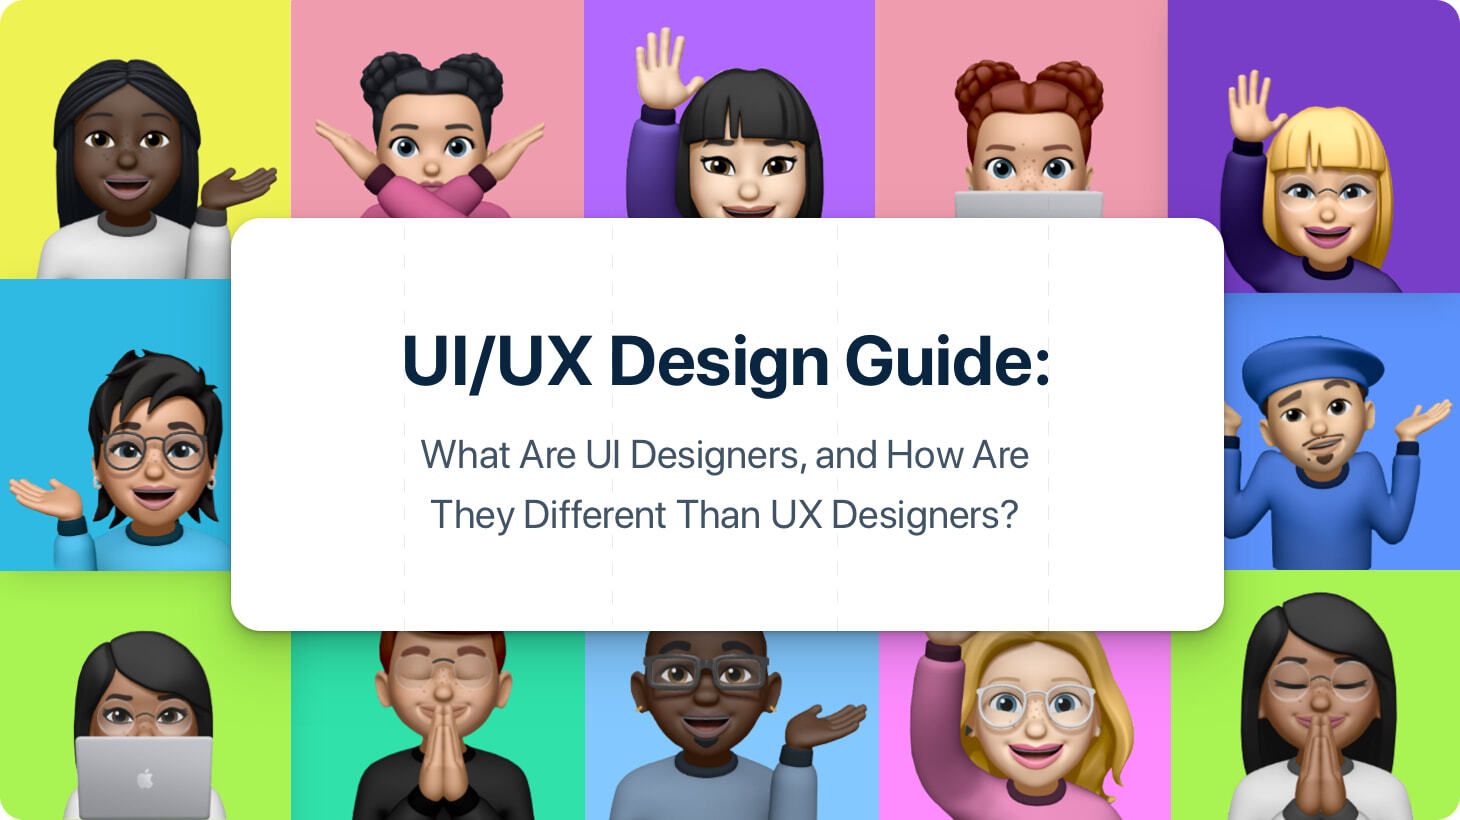 UX Research: What it is, Why it Matters, and Key Types of UX